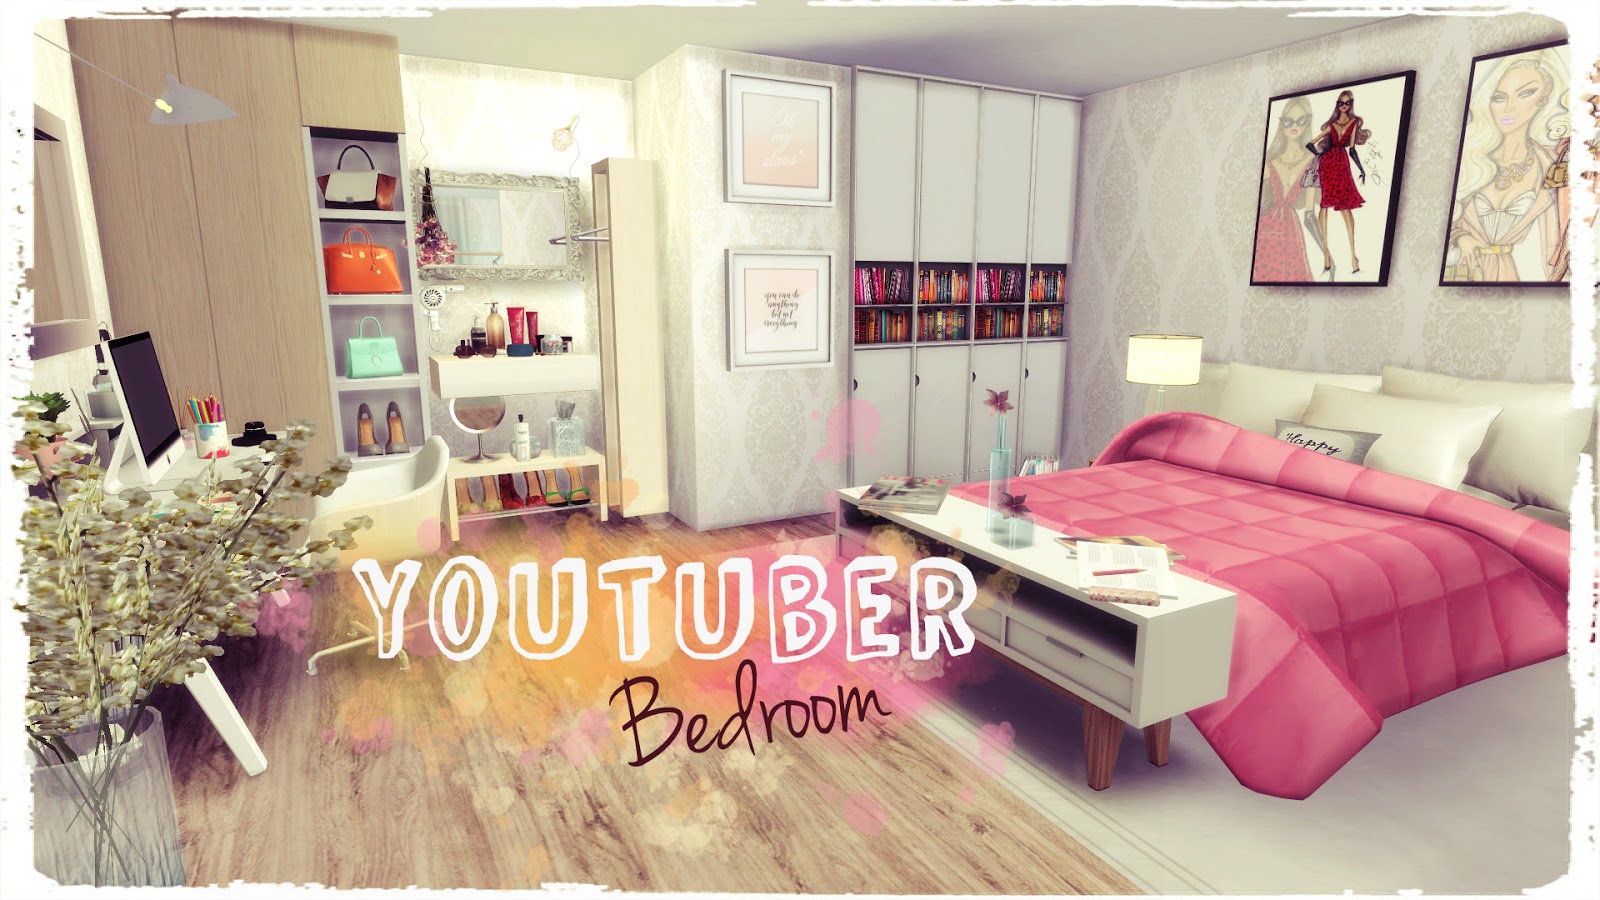 Sims 4 - Youtuber Bedroom - Dinha